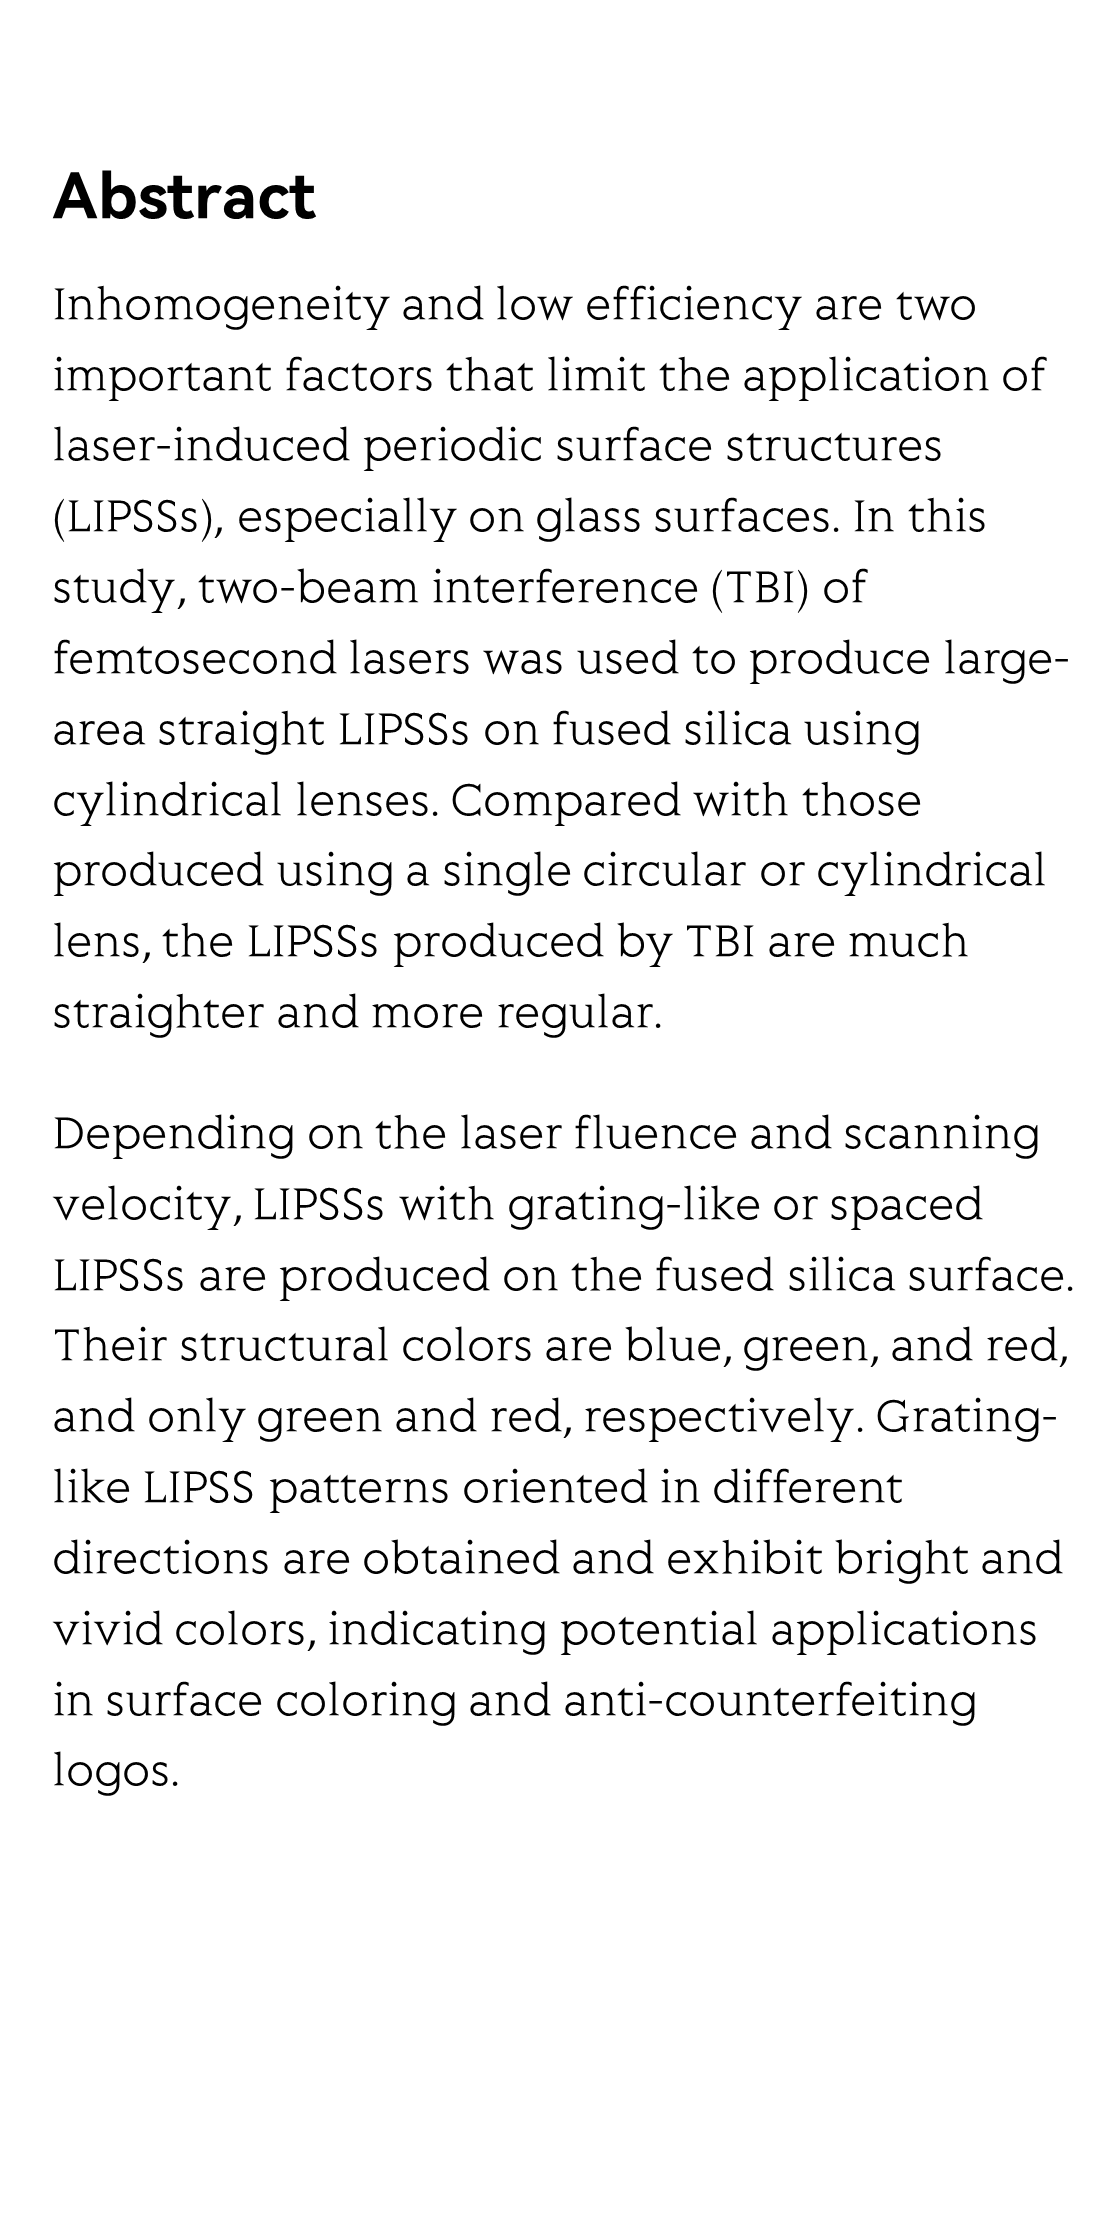 Large-area straight, regular periodic surface structures produced on fused silica by the interference of two femtosecond laser beams through cylindrical lens_2